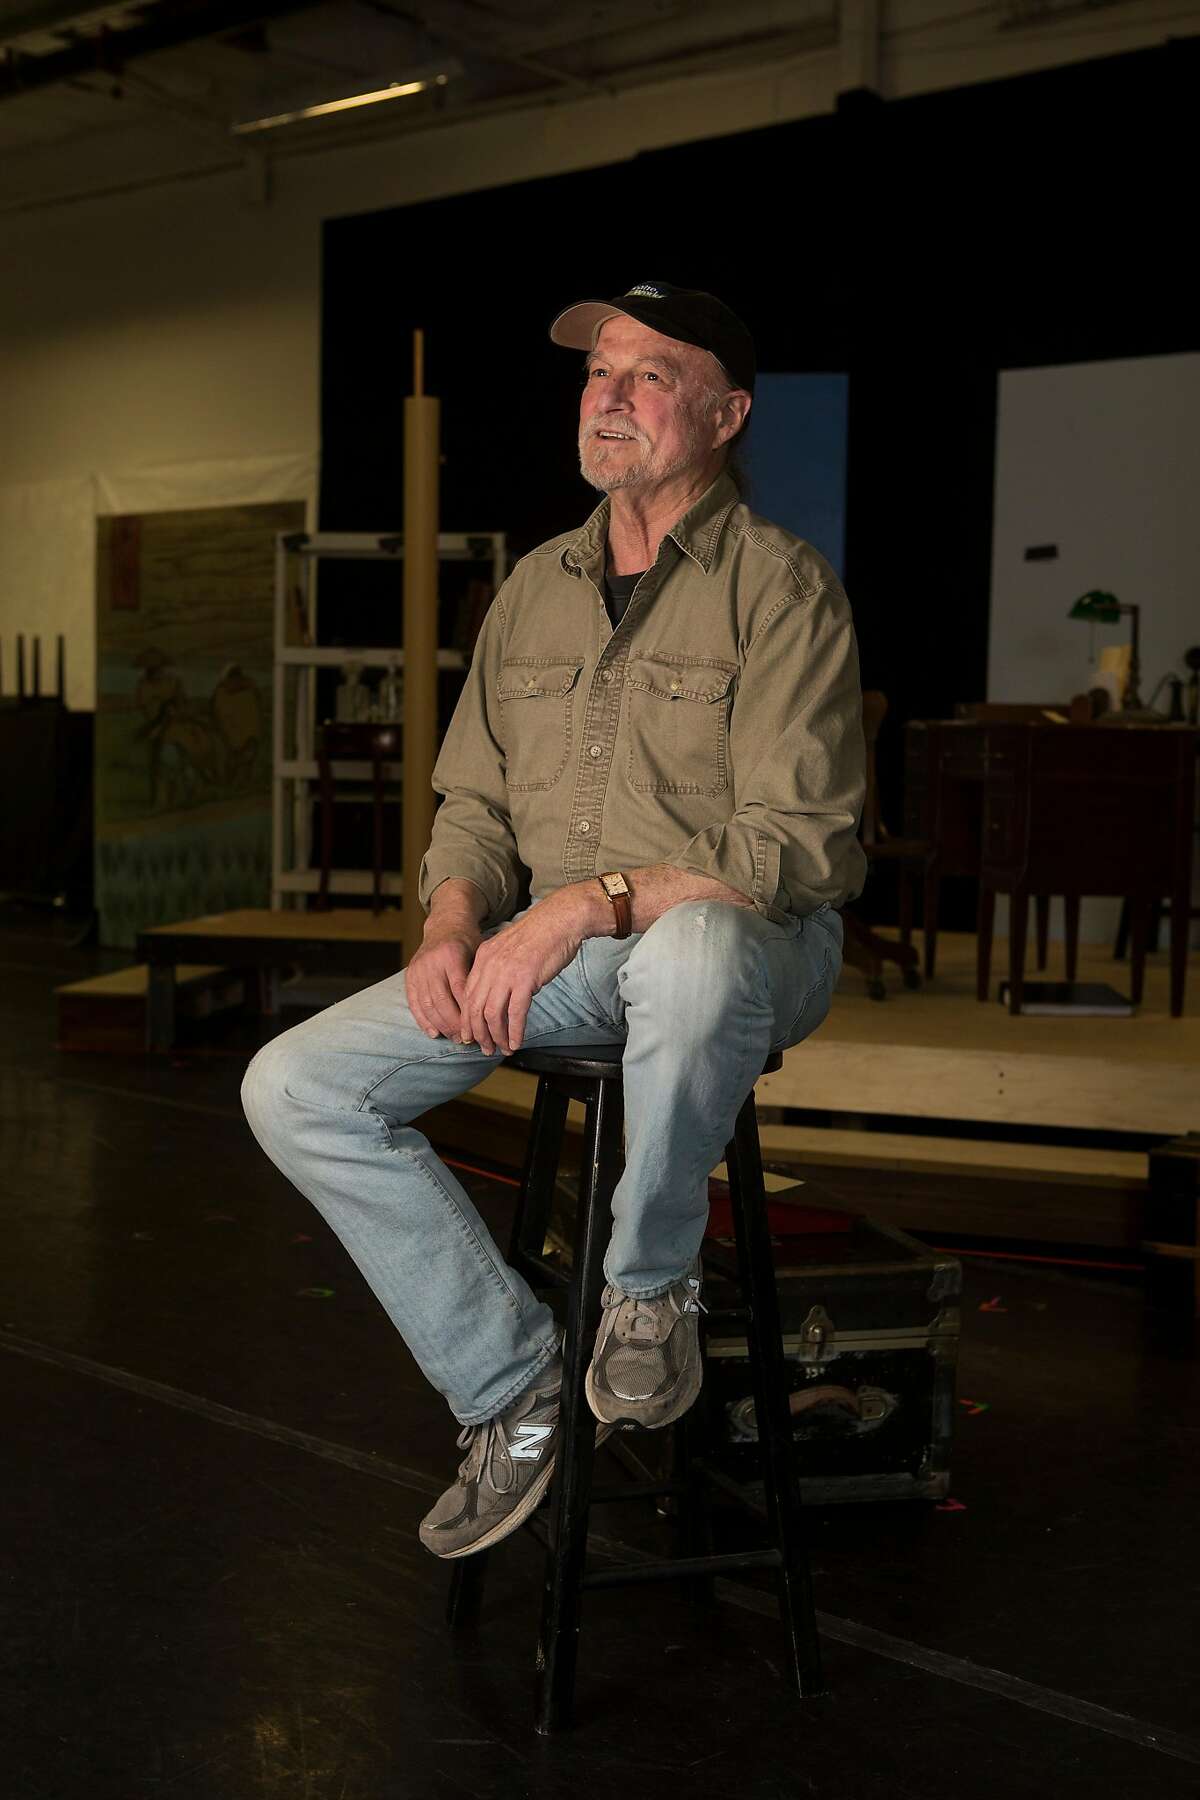 TheatreWorks artistic director Robert Kelley poses for a portrait during rehearsals for "Daddy Long Legs" on November 15, 2016 in Redwood City, Calif.